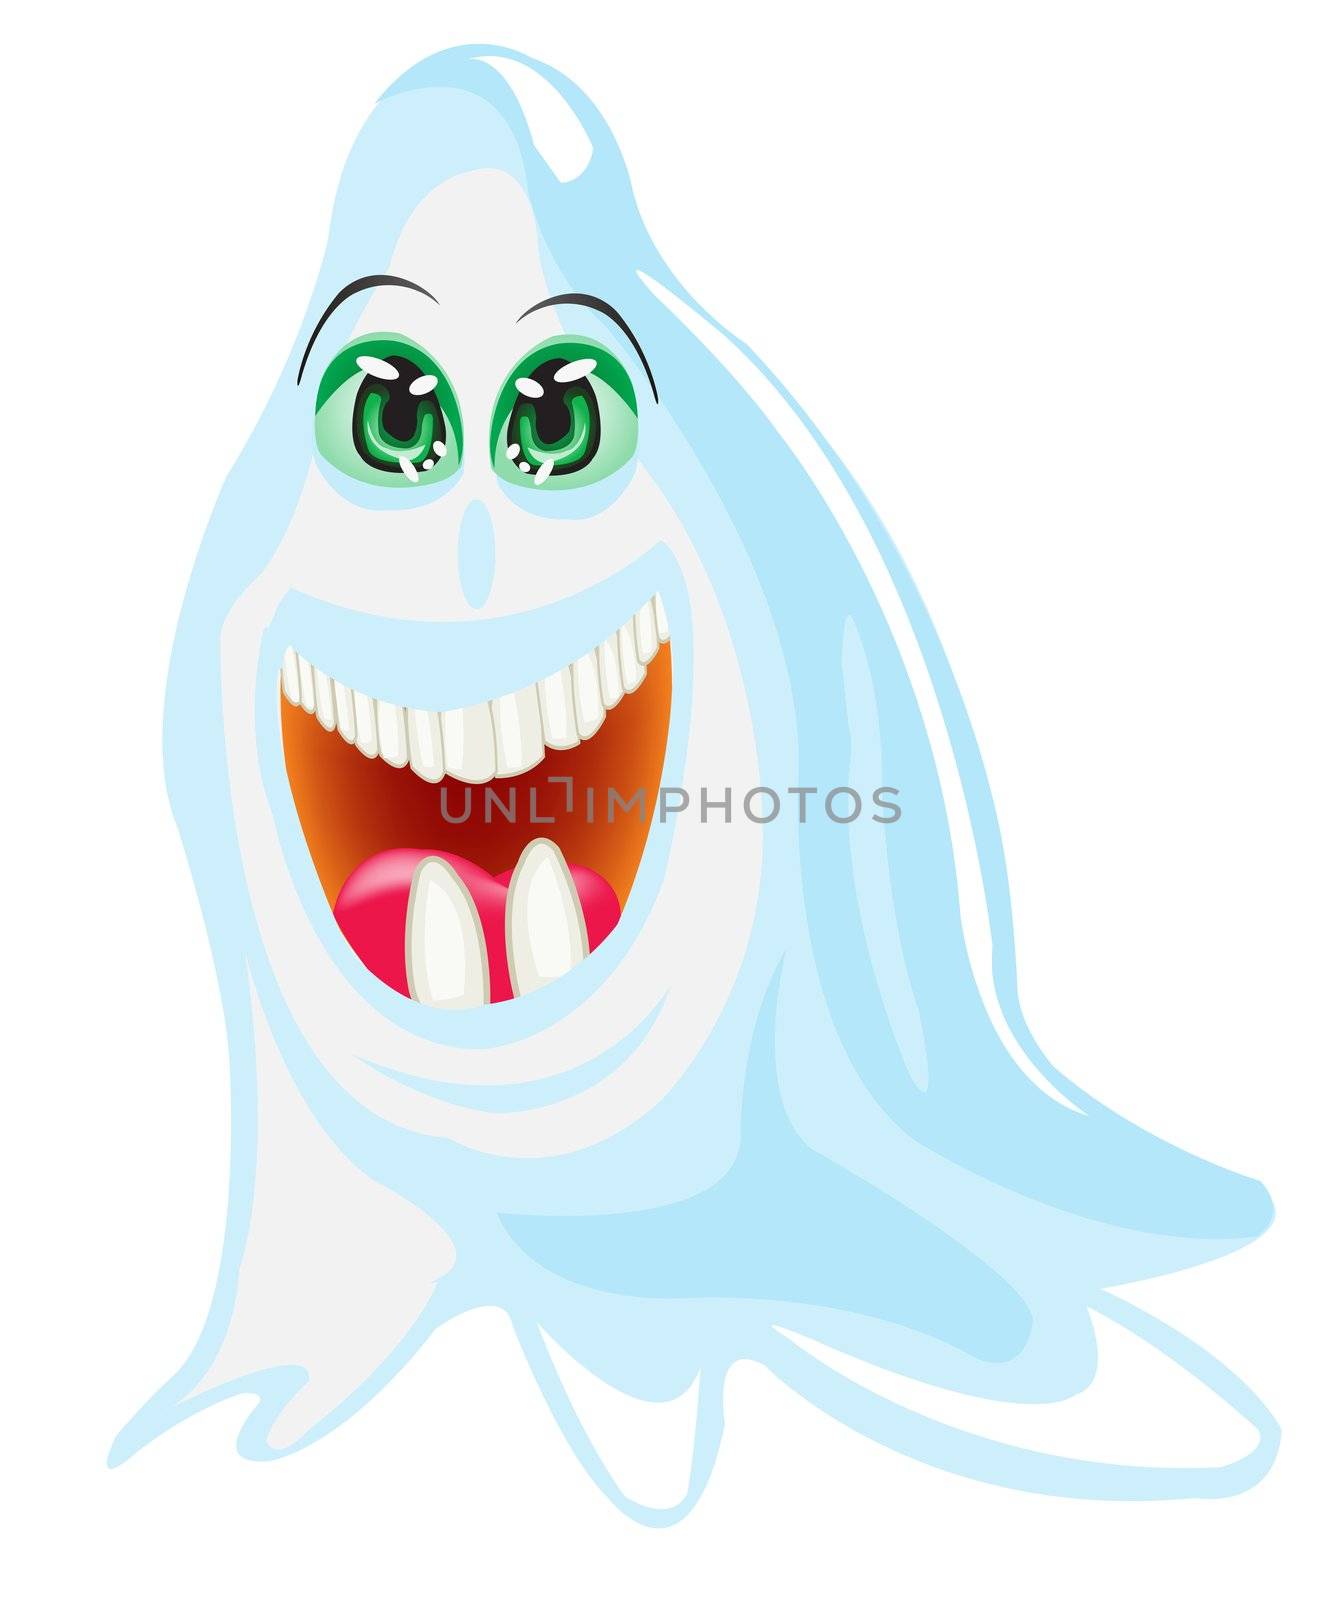 Illustration of the ghost on white background is insulated